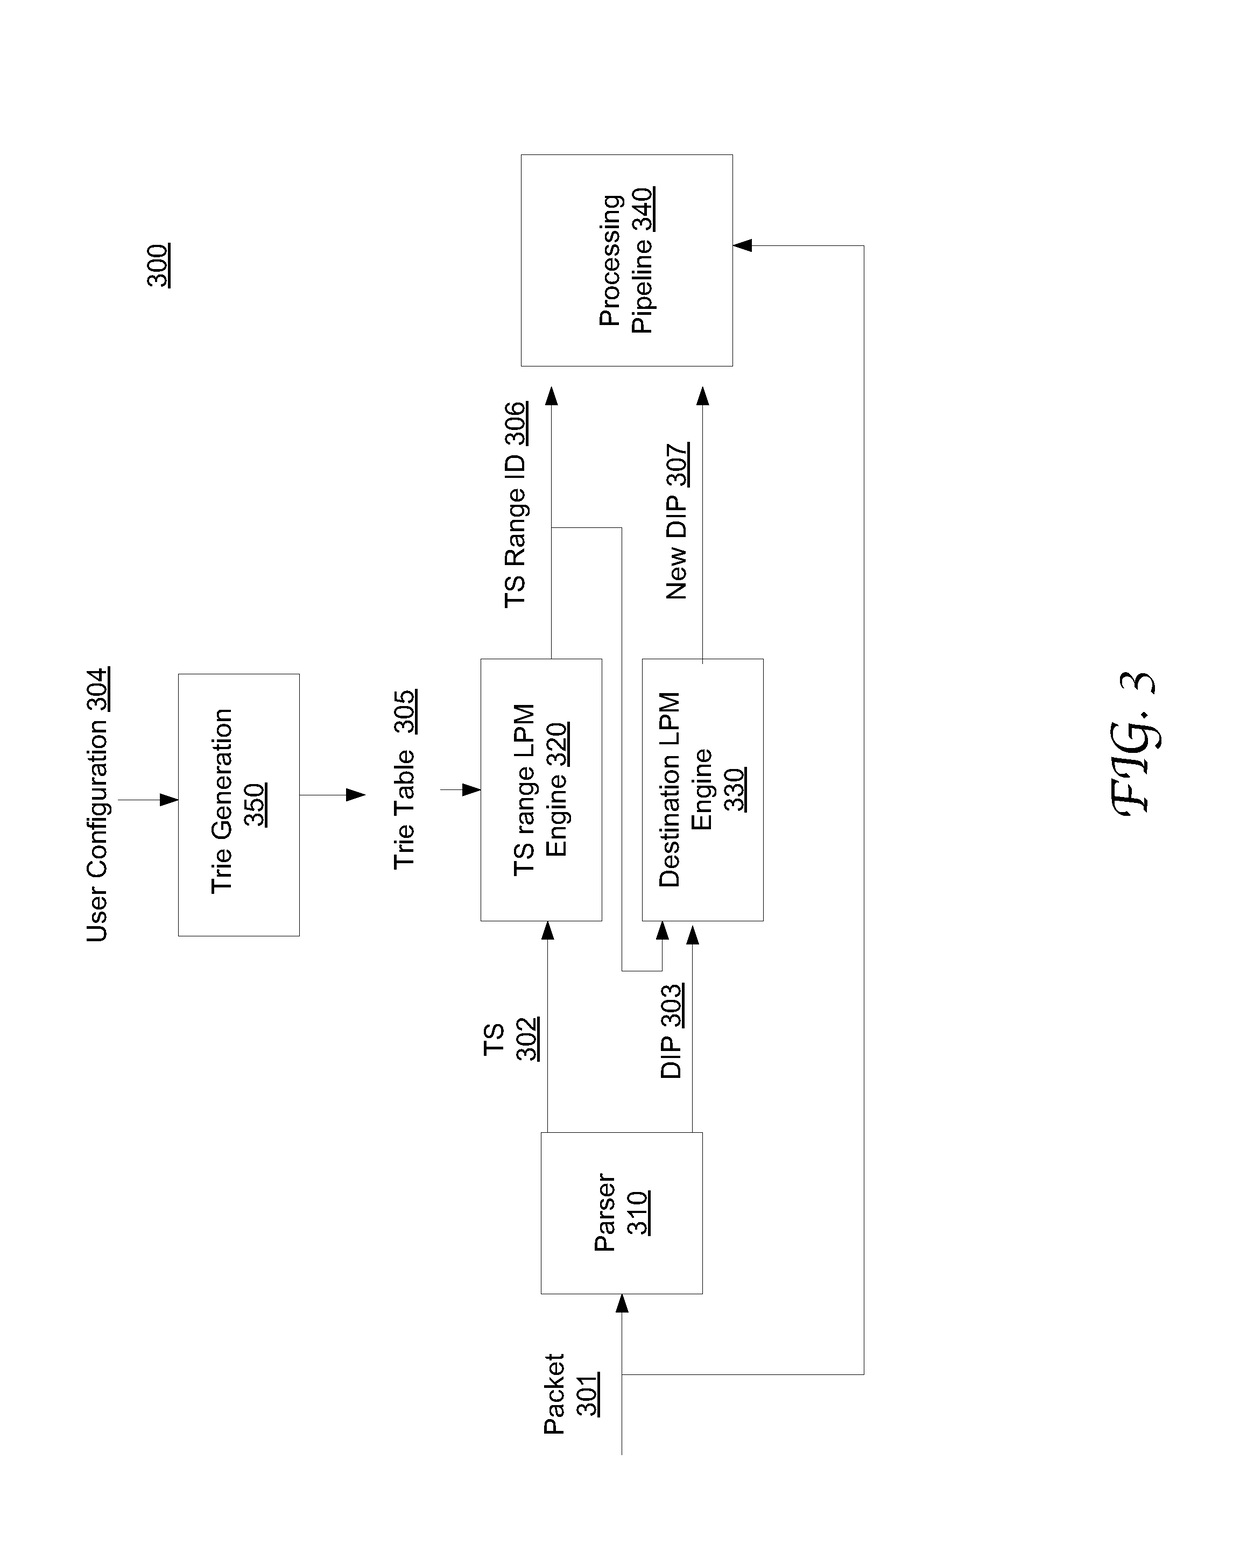 Timestamp-based packet switching using a trie data structure